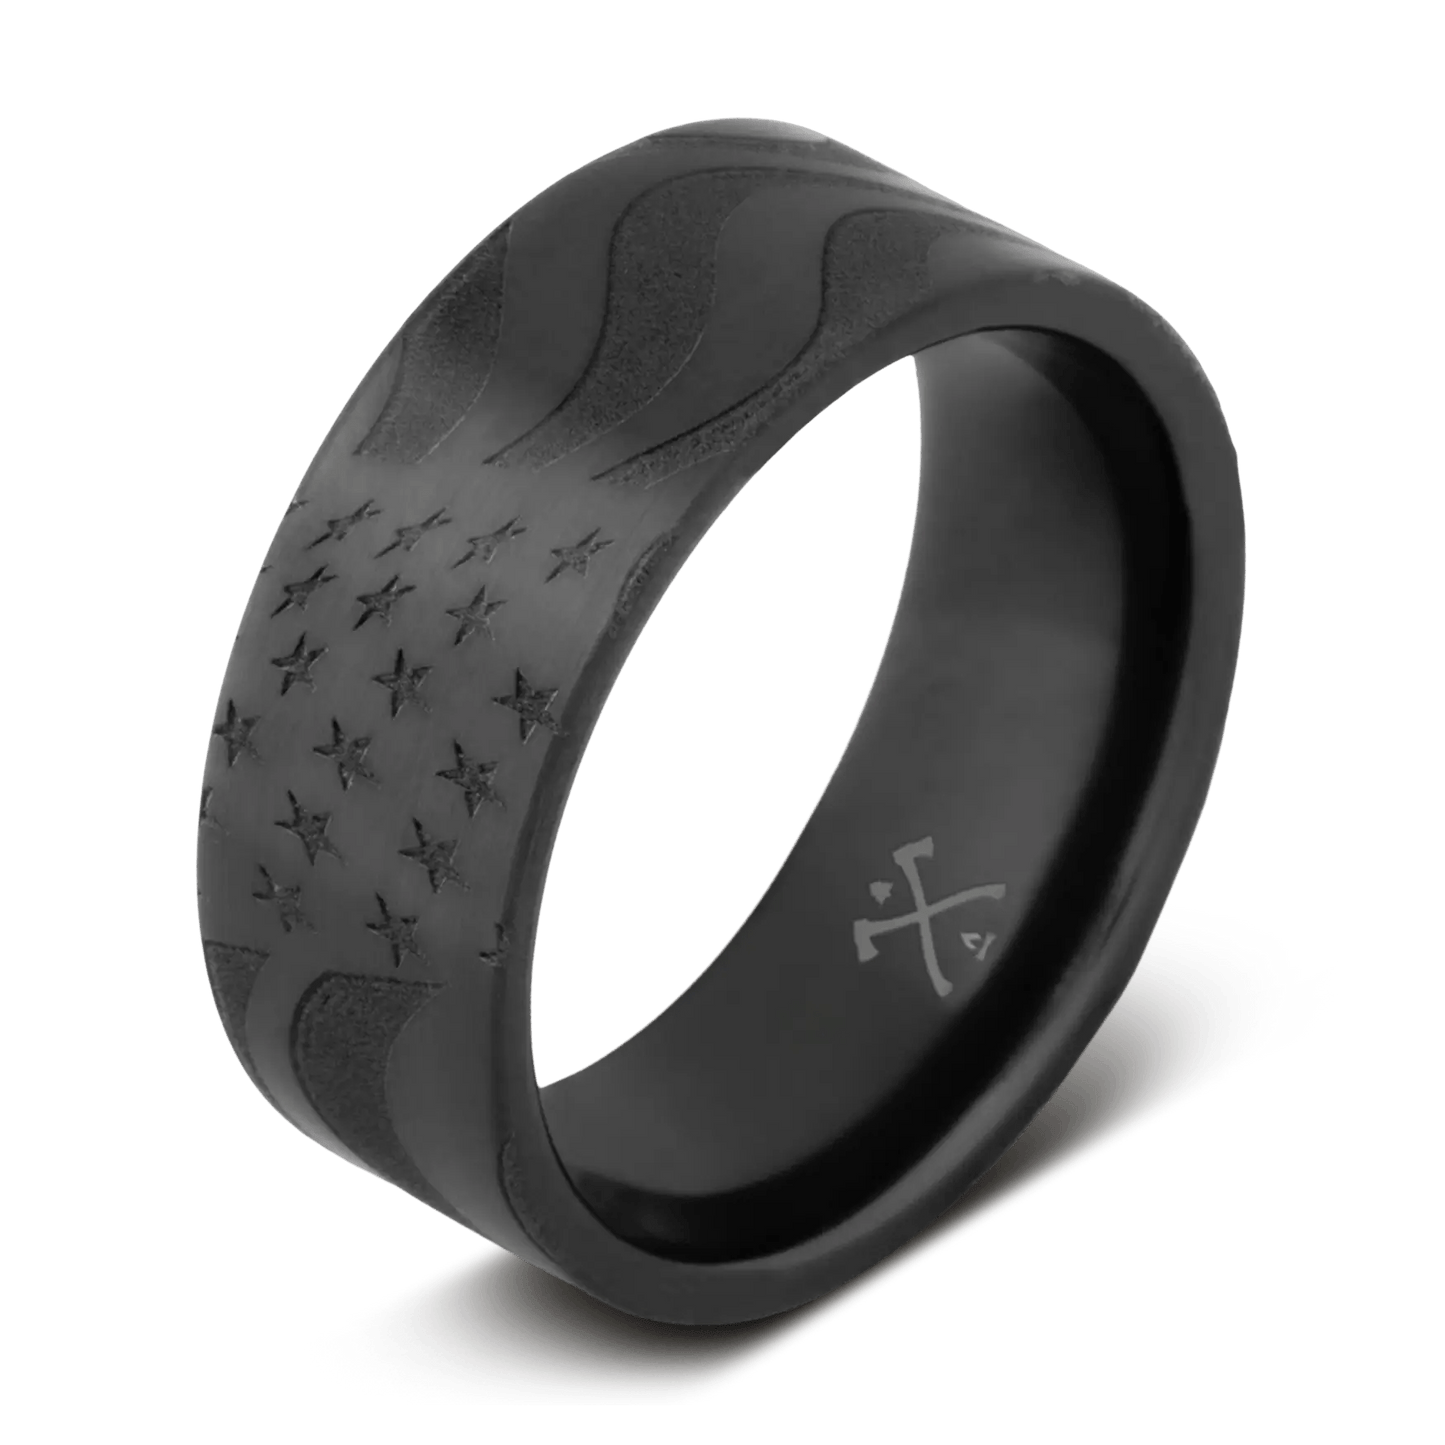 The American black ring for men made with black zirconium made with American flag engraving